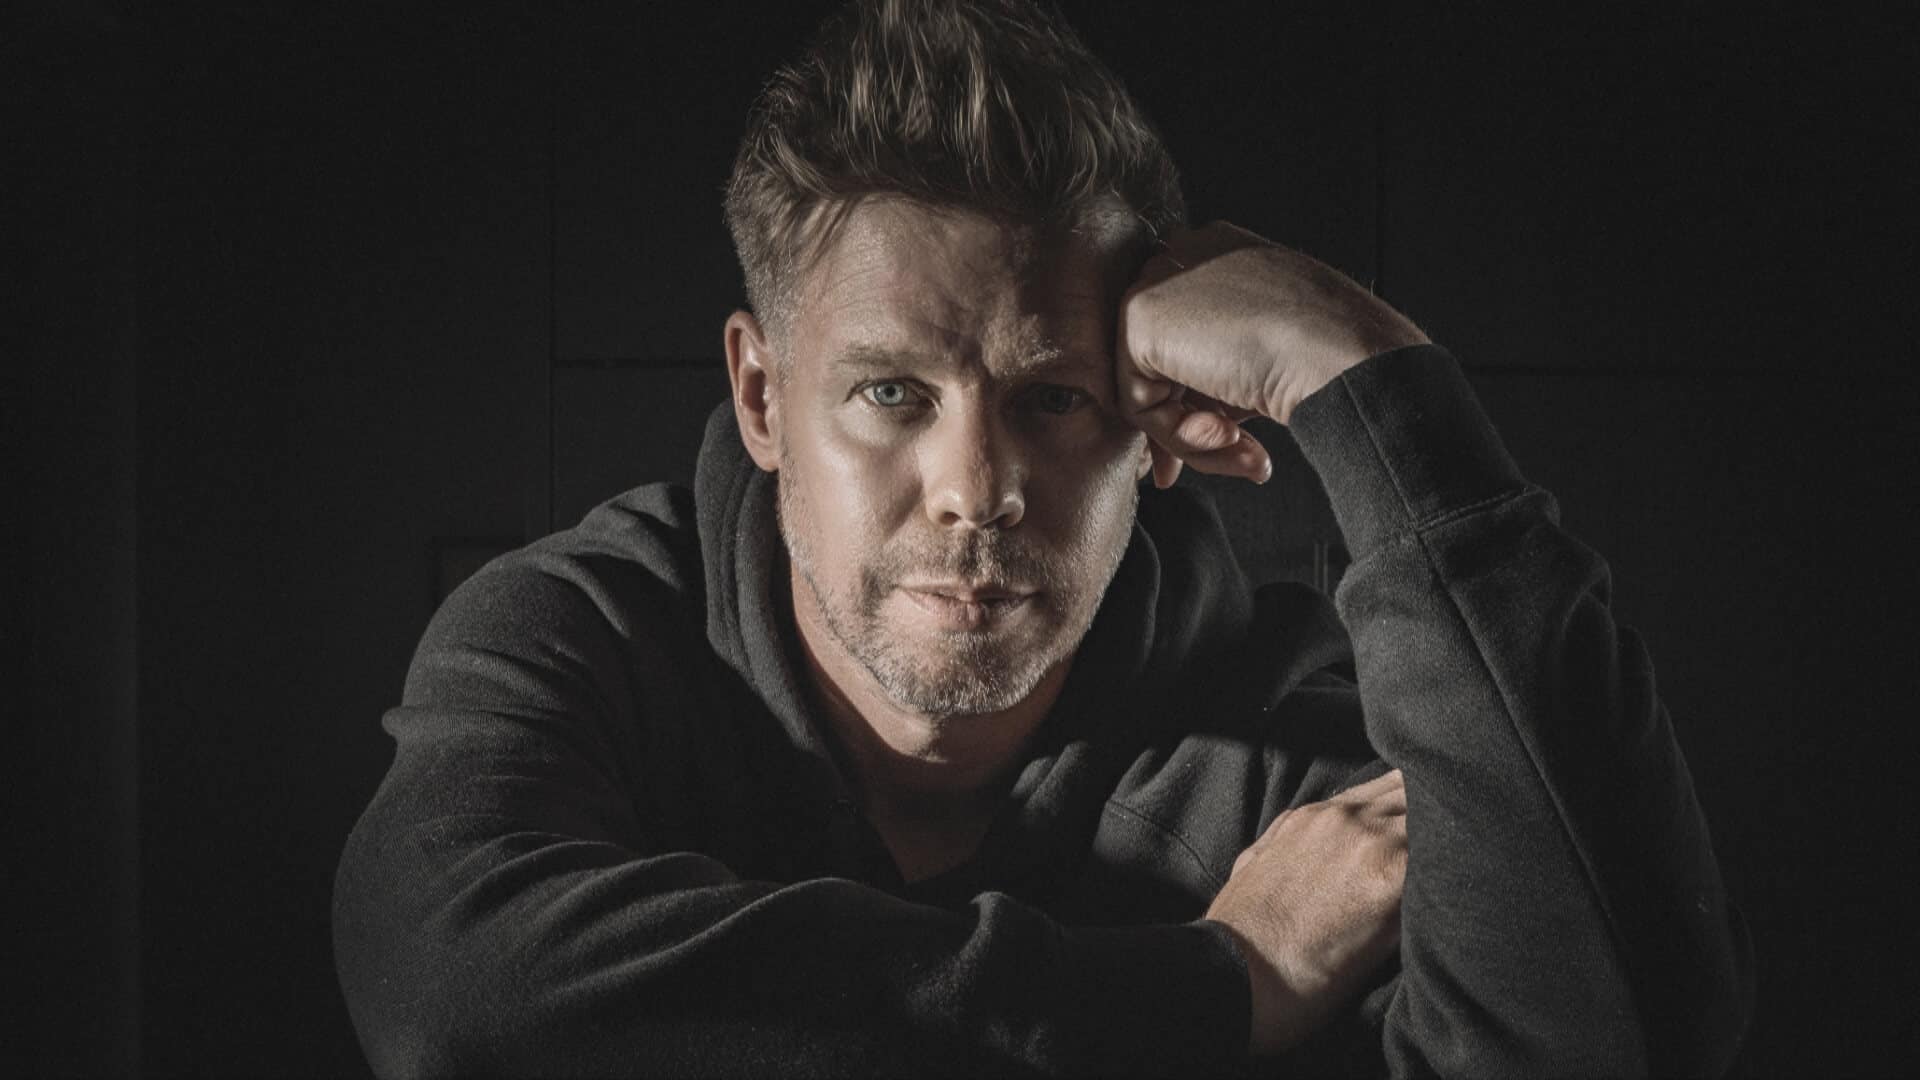 Ferry Corsten and Diandra Faye deliver electric new single, ‘Stay Awake’: Listen